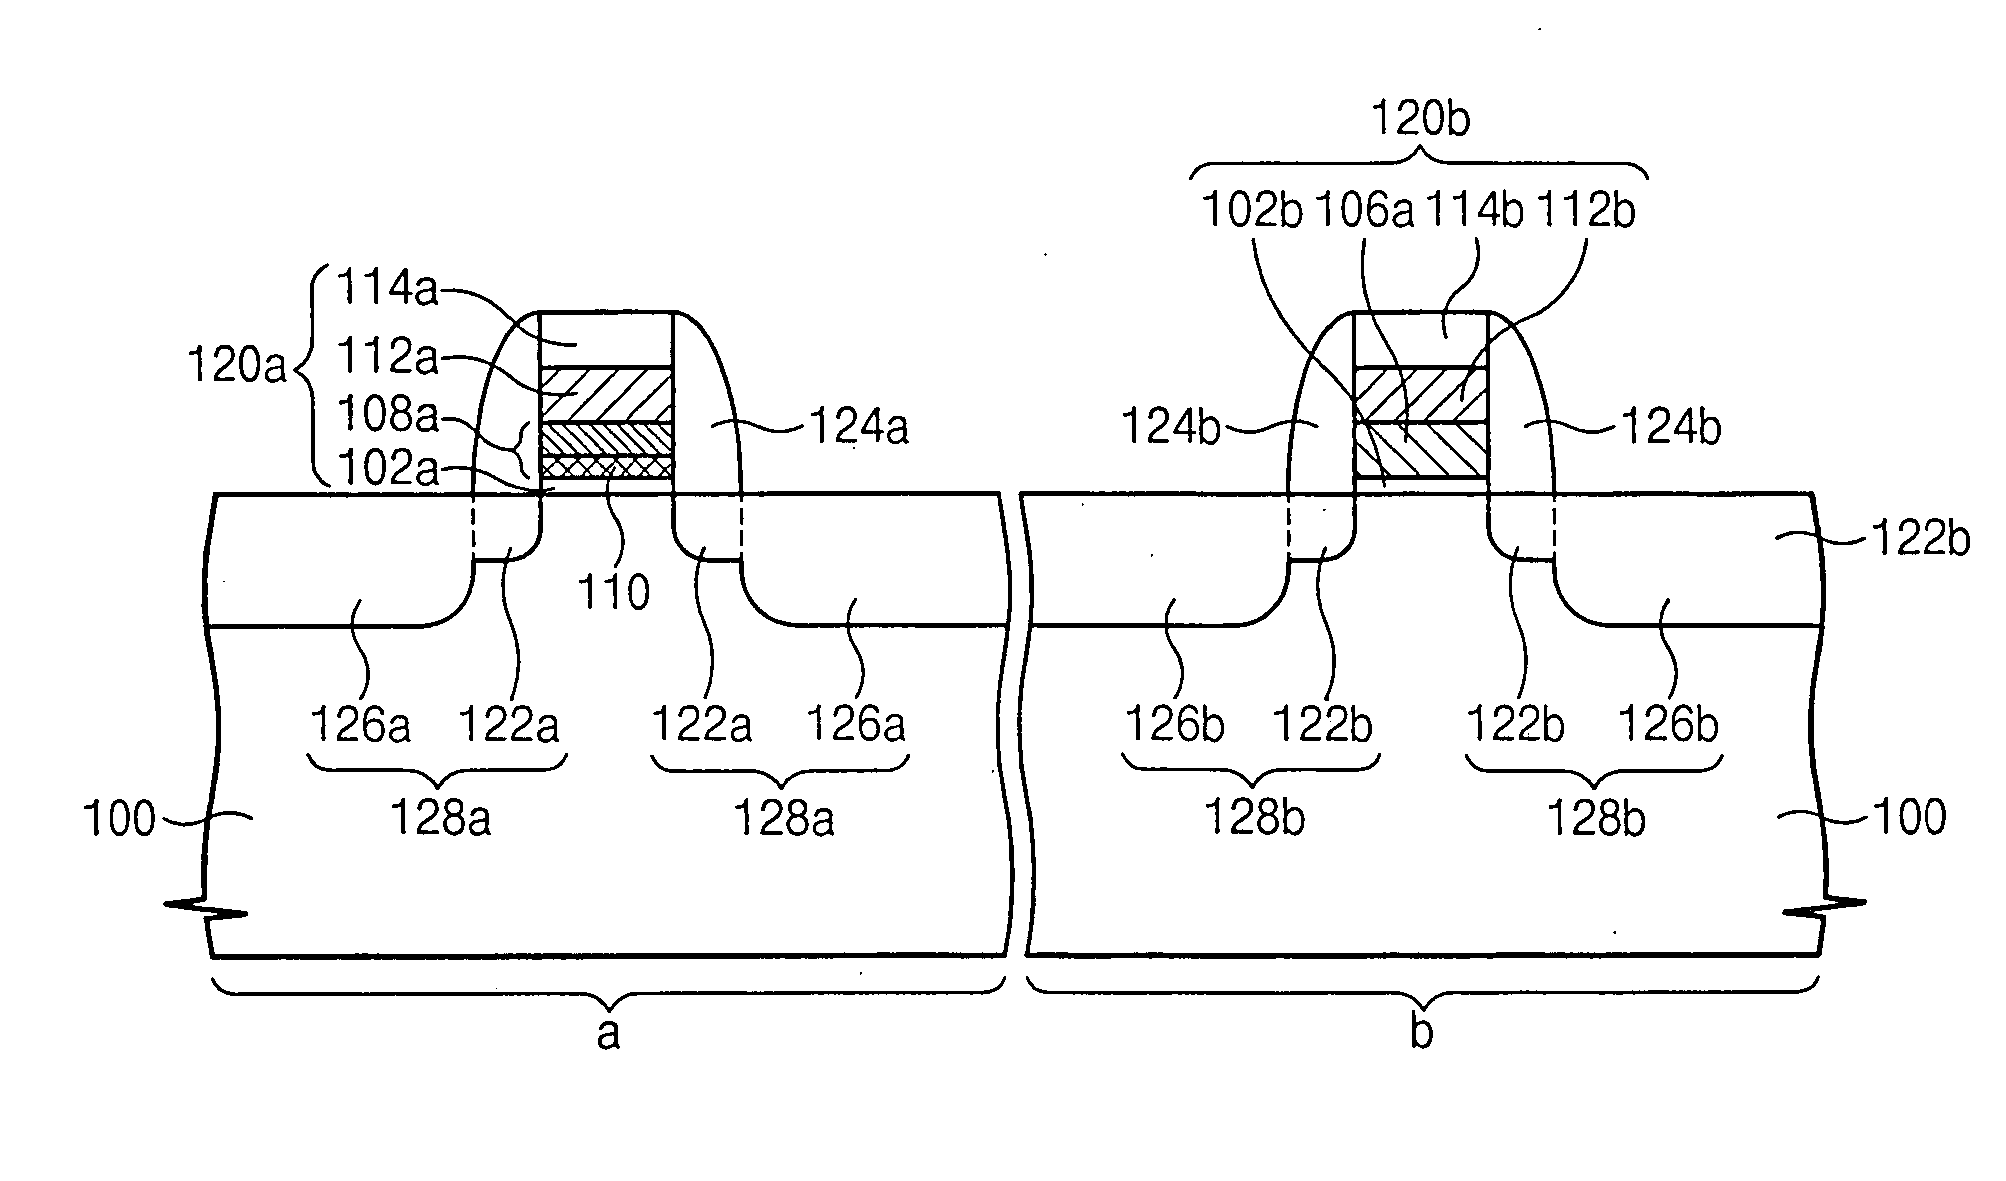 Semiconductor device having dual gate electrode and related method of formation